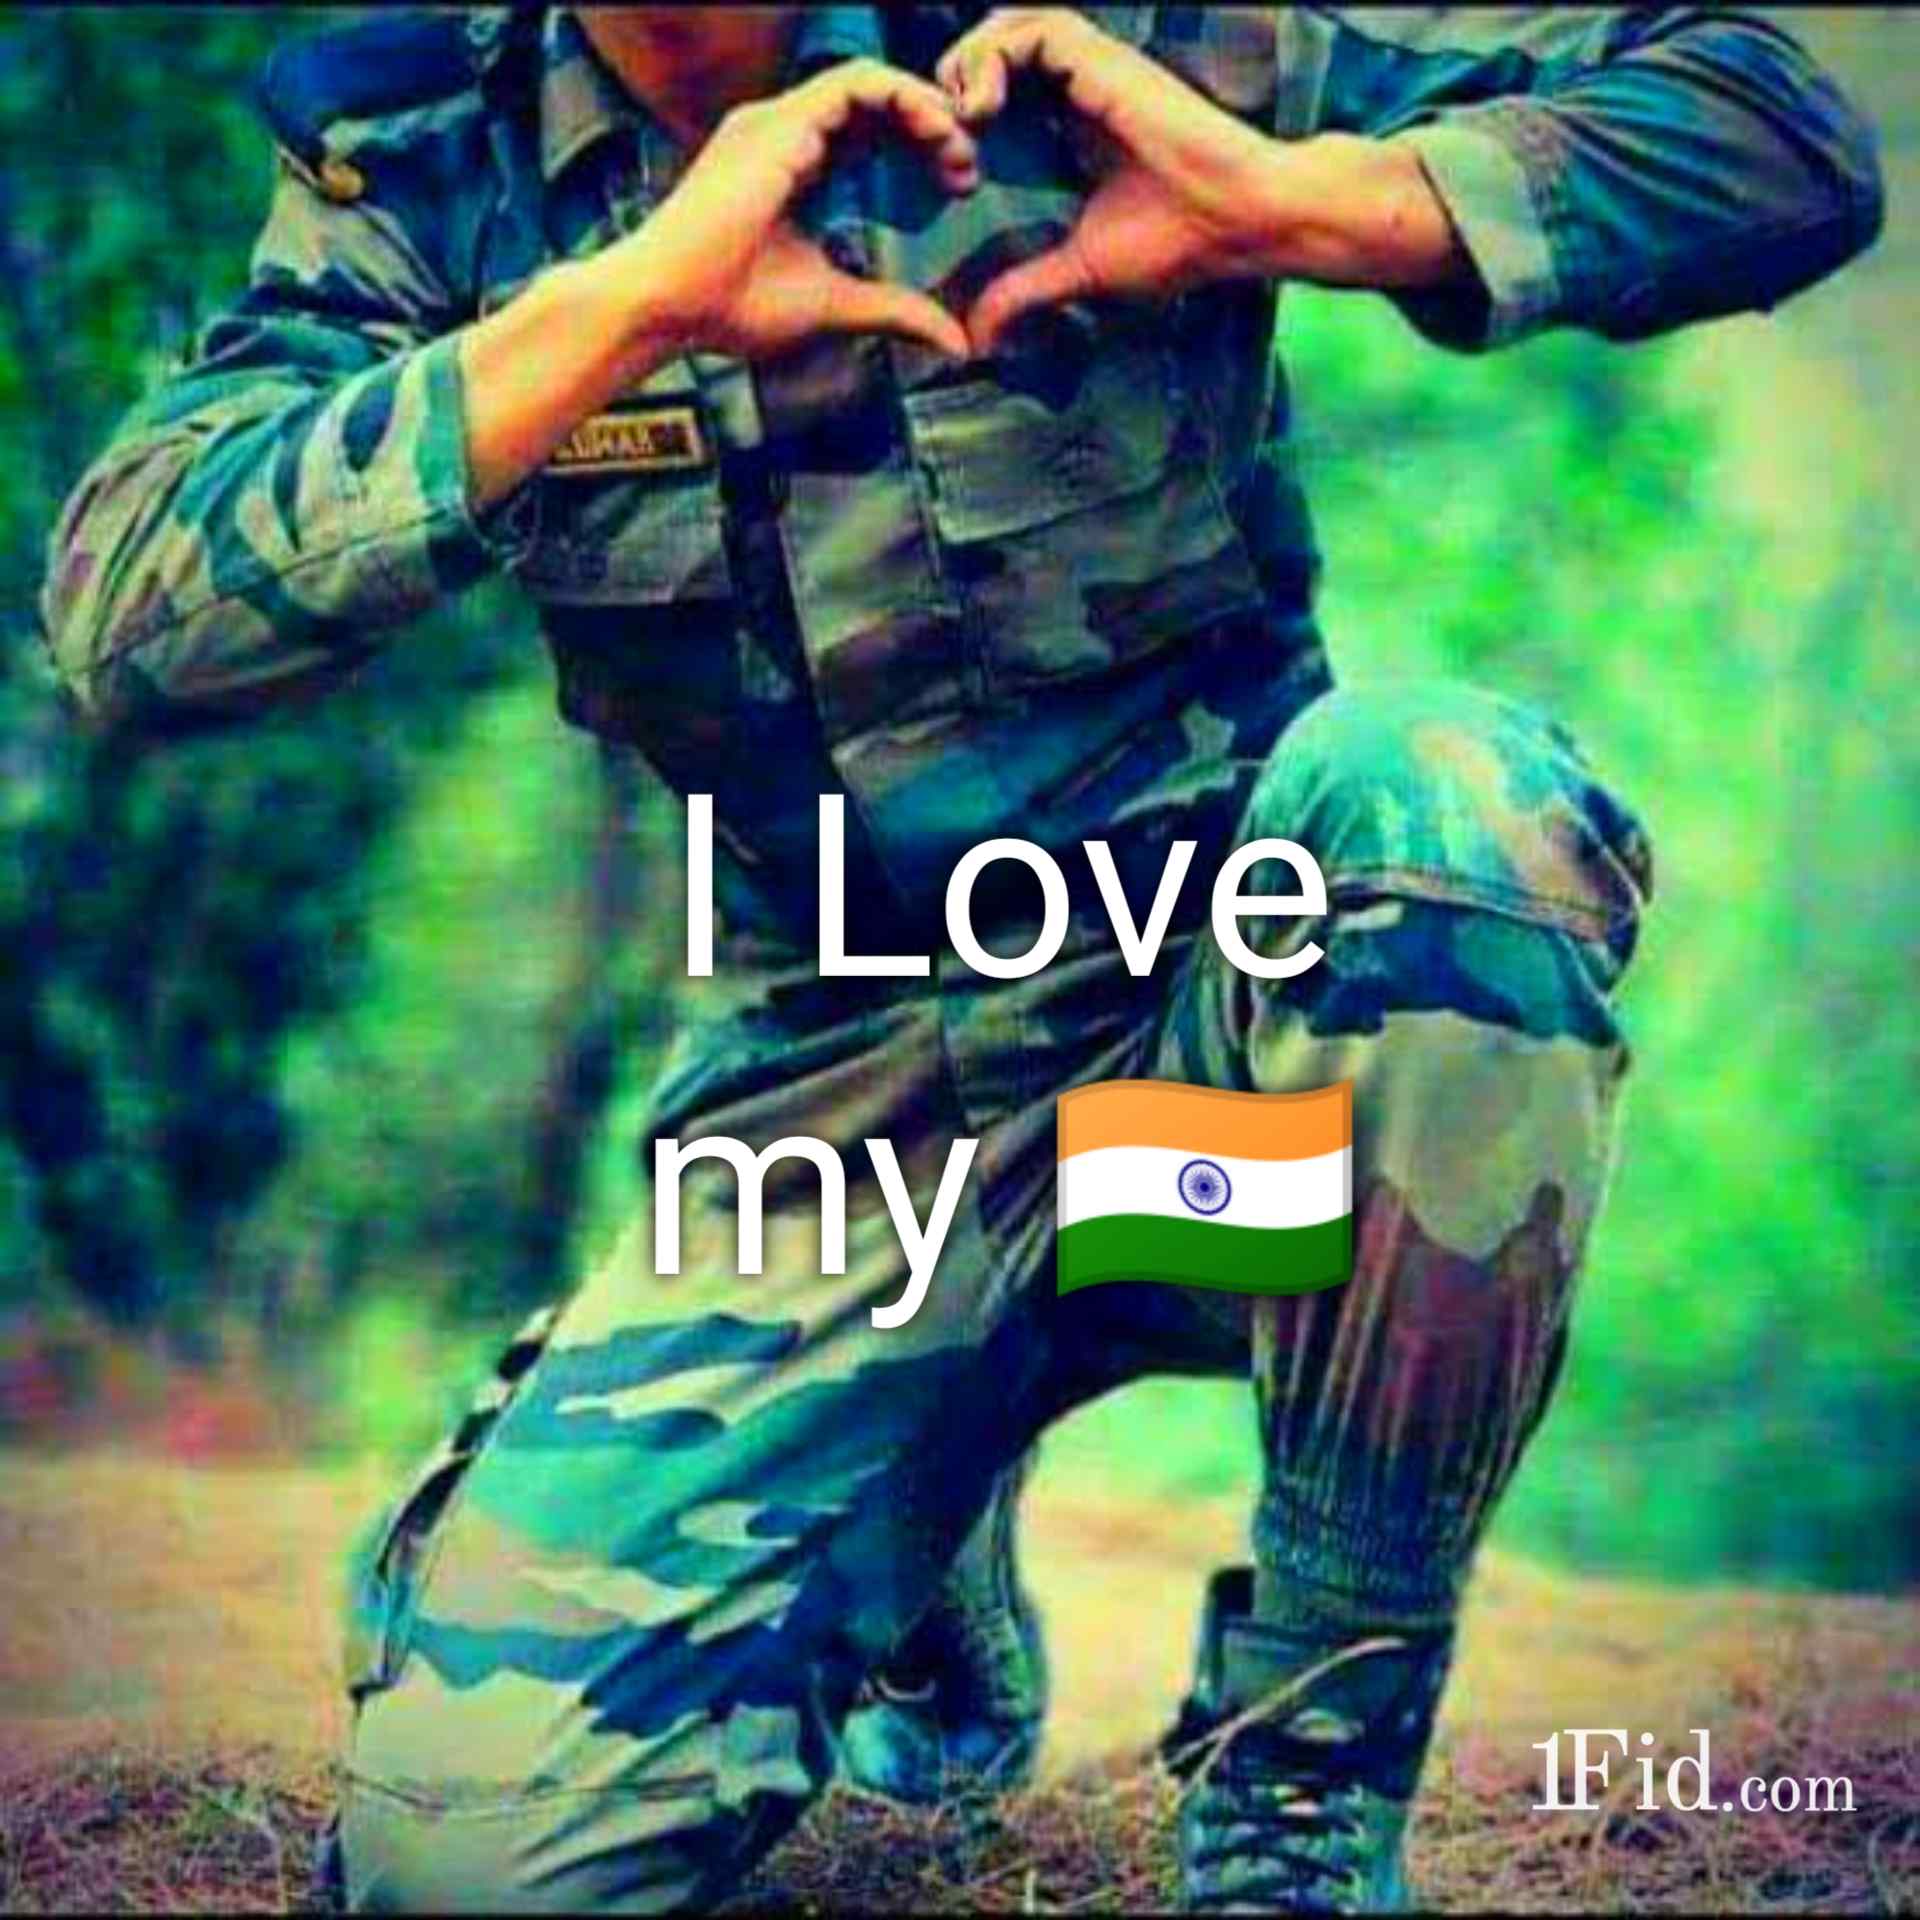 I Love Indian Army Songs Download - Free Online Songs @ JioSaavn